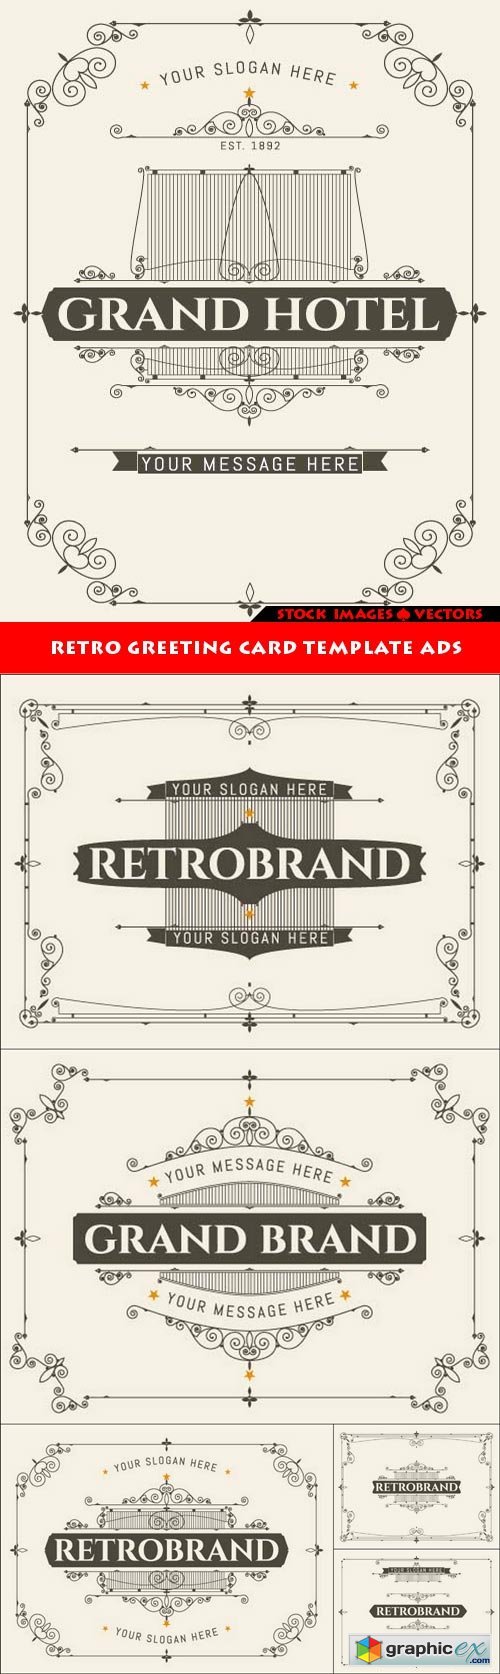 Retro greeting card template ads 6x EPS